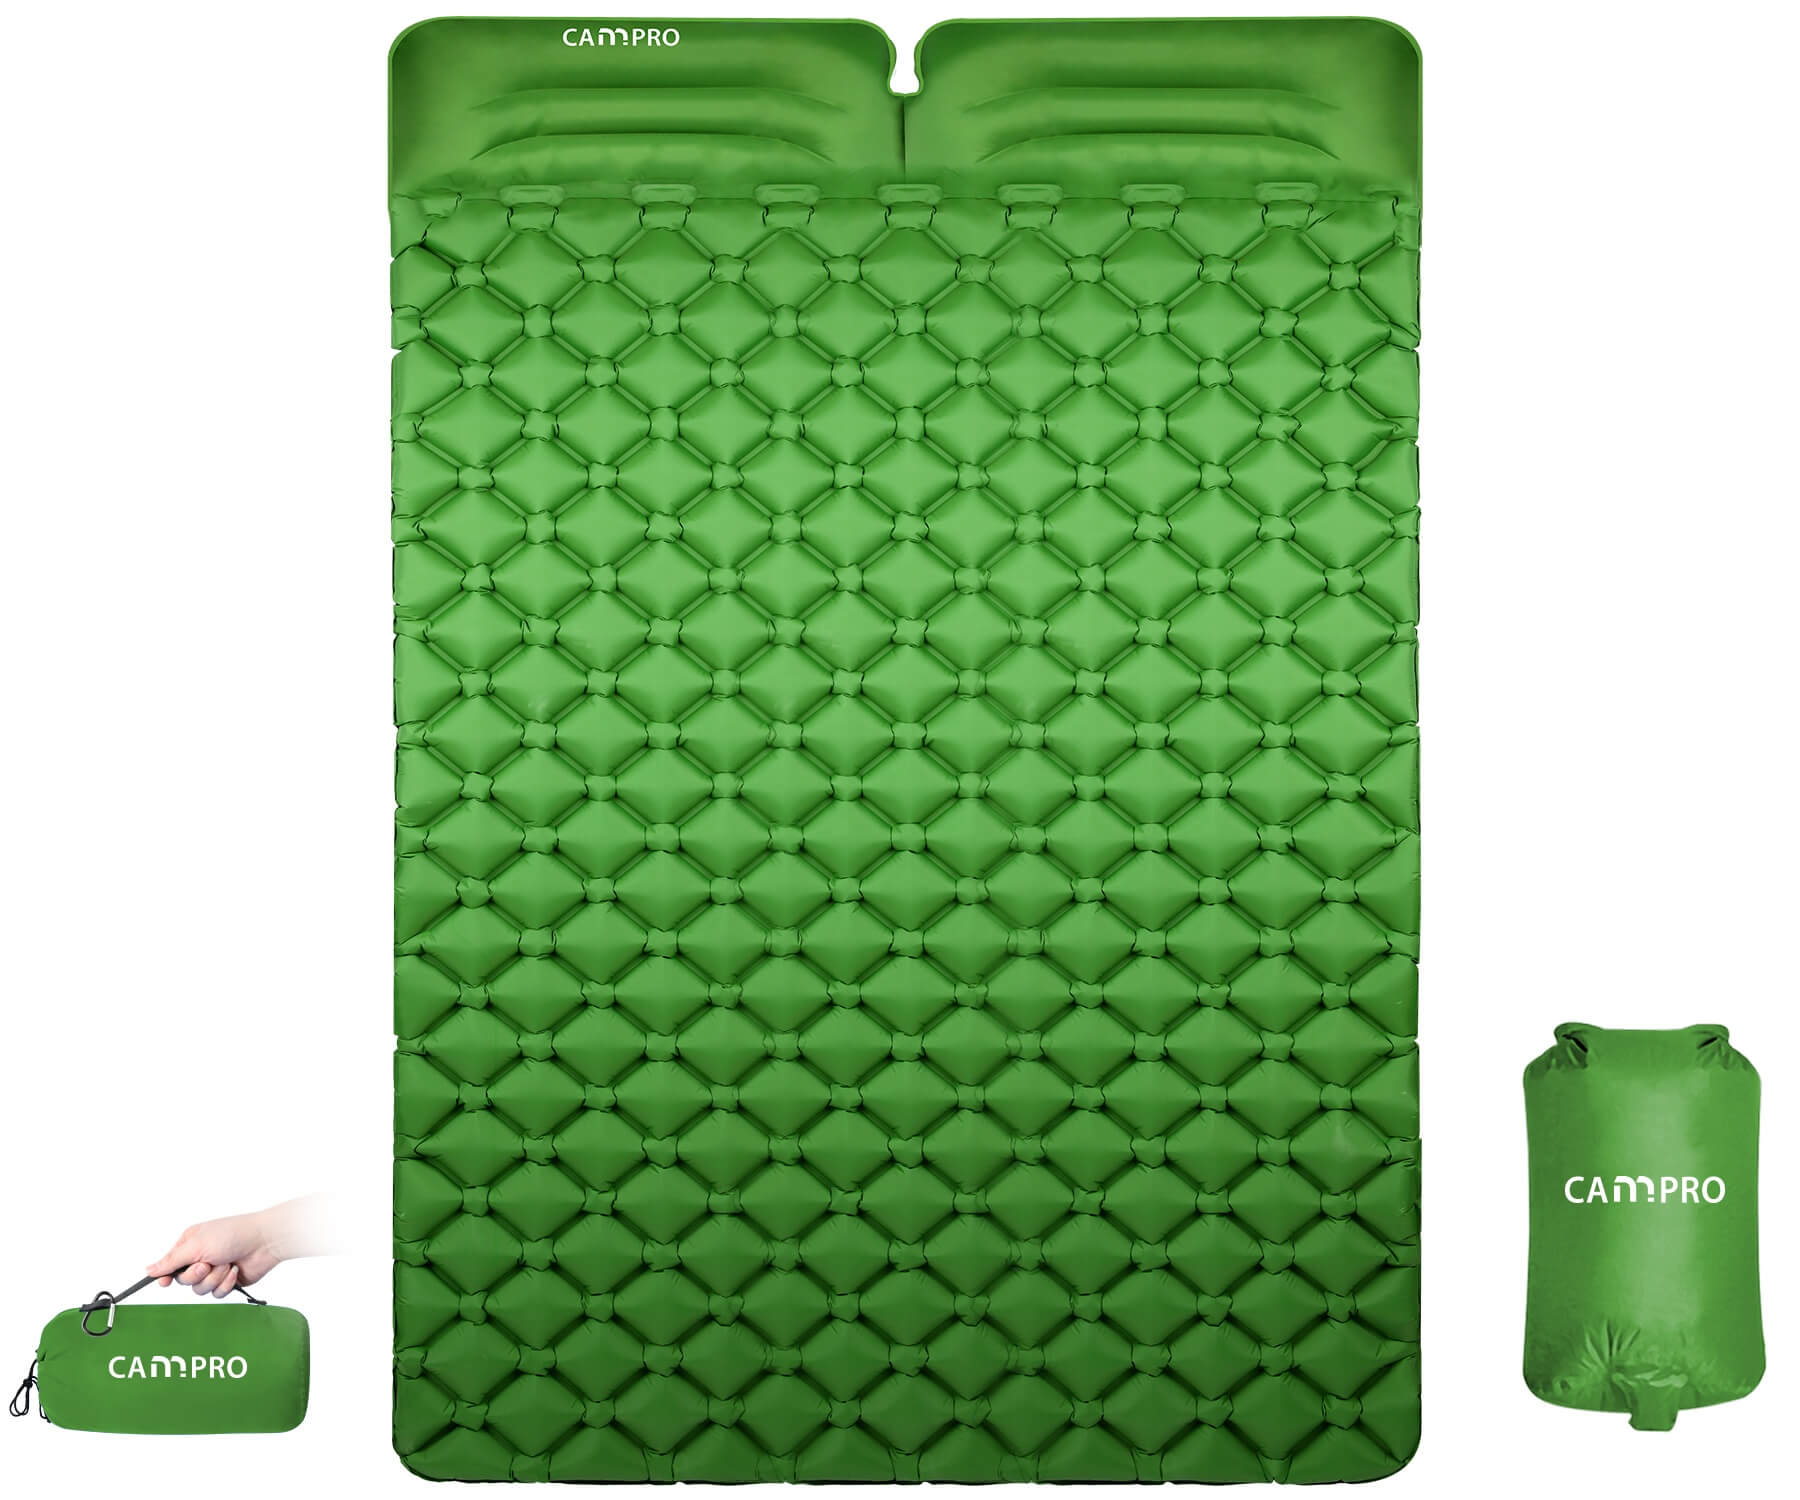 Double Camping Mat - The Mattress For Couples - LINWEY - Best Double Camping Mat - The Mattress For Couples